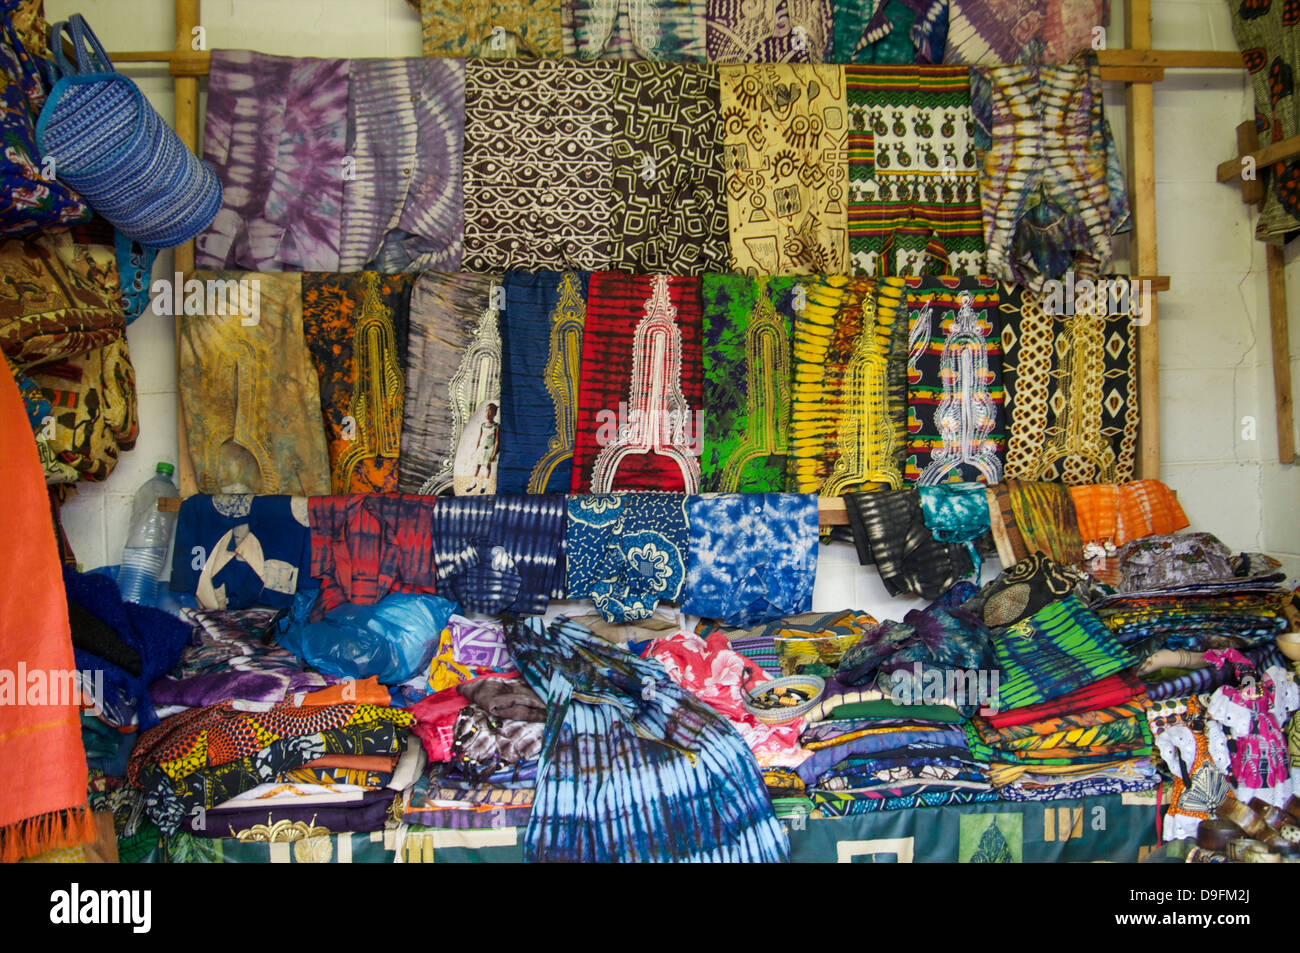 Souvenirs At Market High Resolution Stock Photography and Images - Alamy